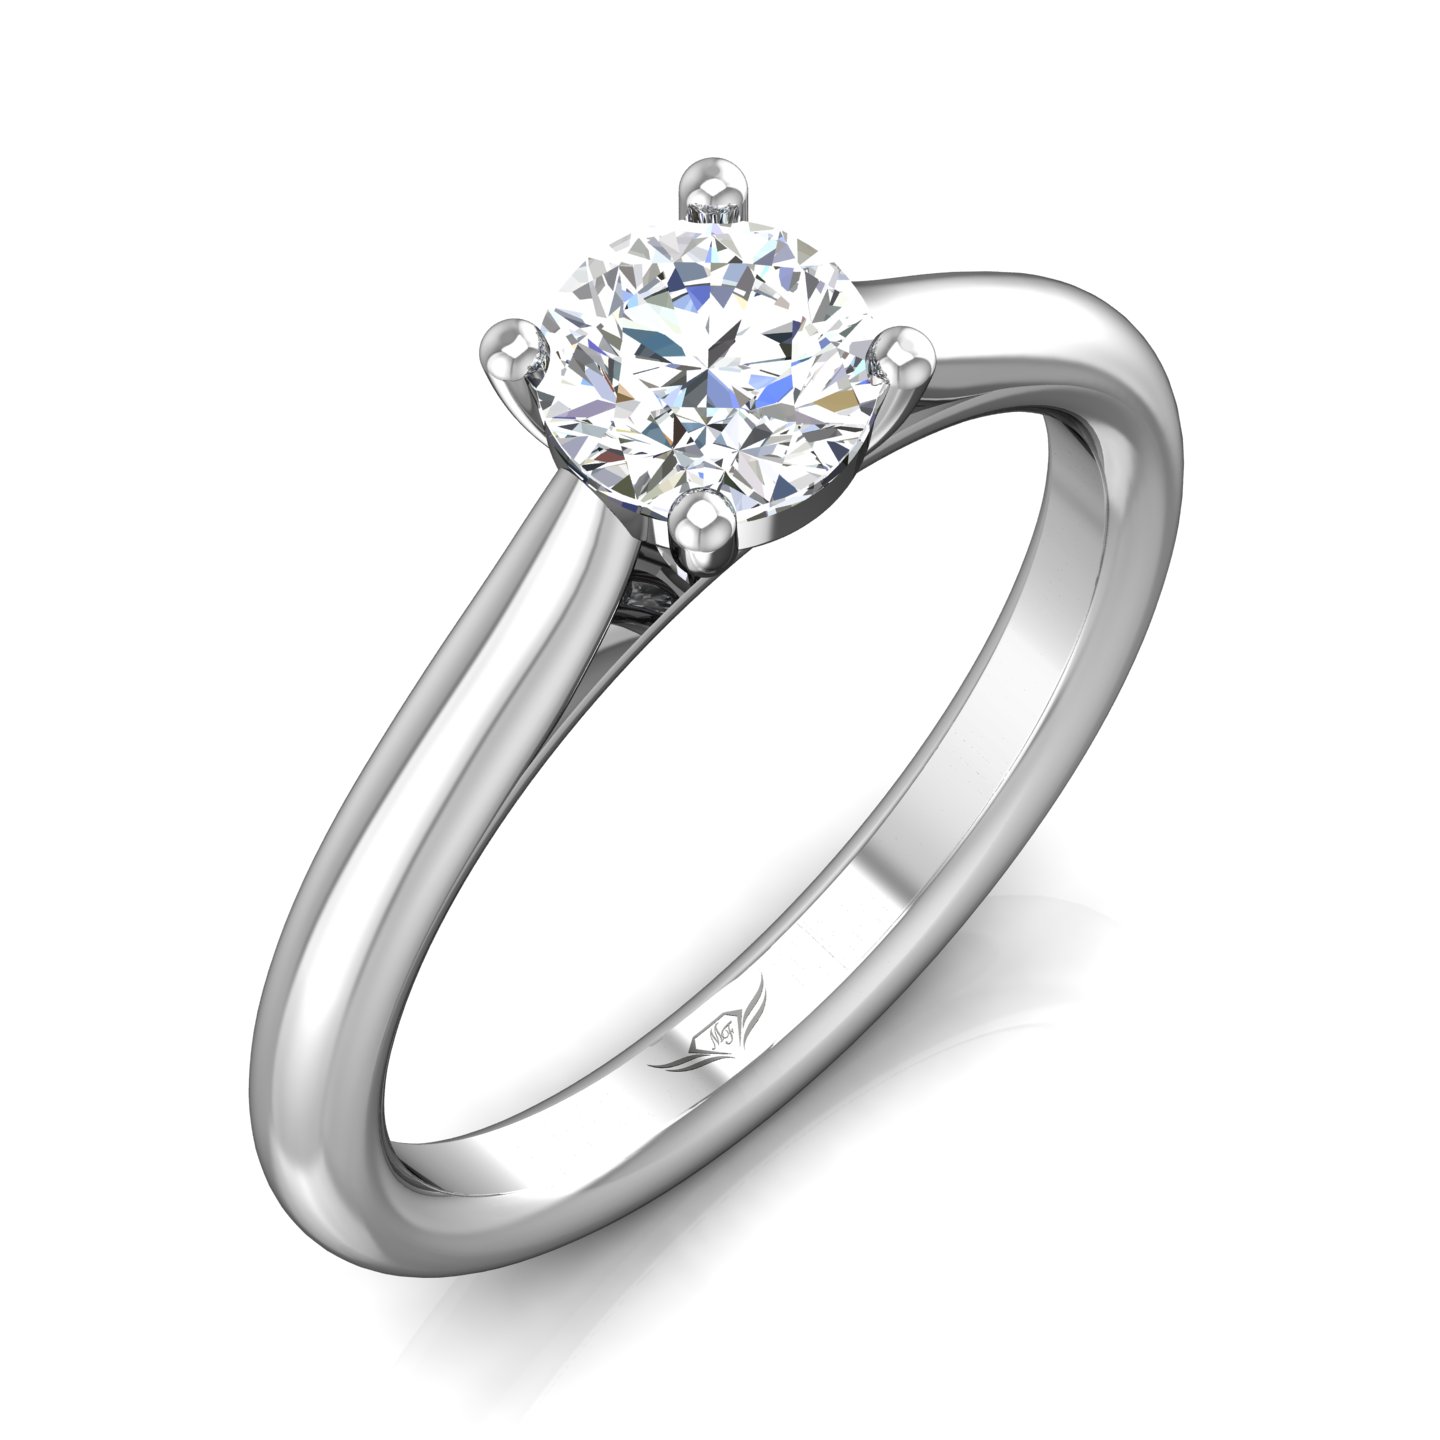 14K White Gold FlyerFit Solitaire Engagement Ring Image 5 Christopher's Fine Jewelry Pawleys Island, SC